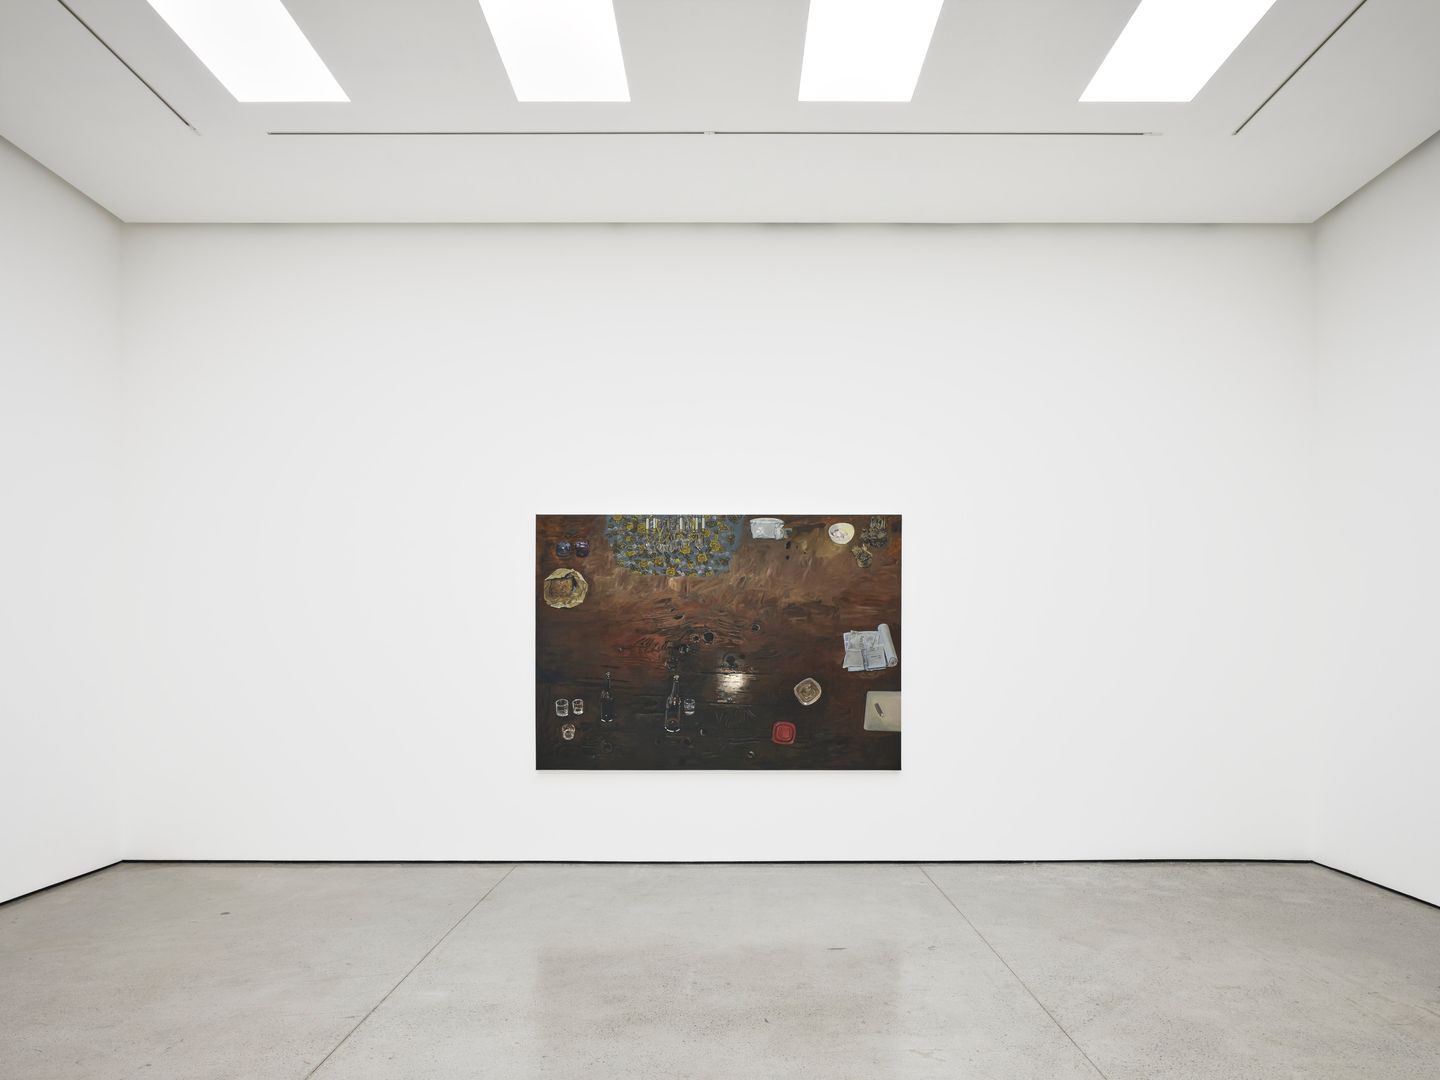 Margaux Williamson, Table with Beer and Bread (2022). Oil on canvas. 177.8 x 254 cm. Exhibition view: Margaux Williamson, White Cube, Hong Kong (18 November 2022–7 January 2023). © Margaux Williamson and White Cube. Photo: Kitmin Lee.